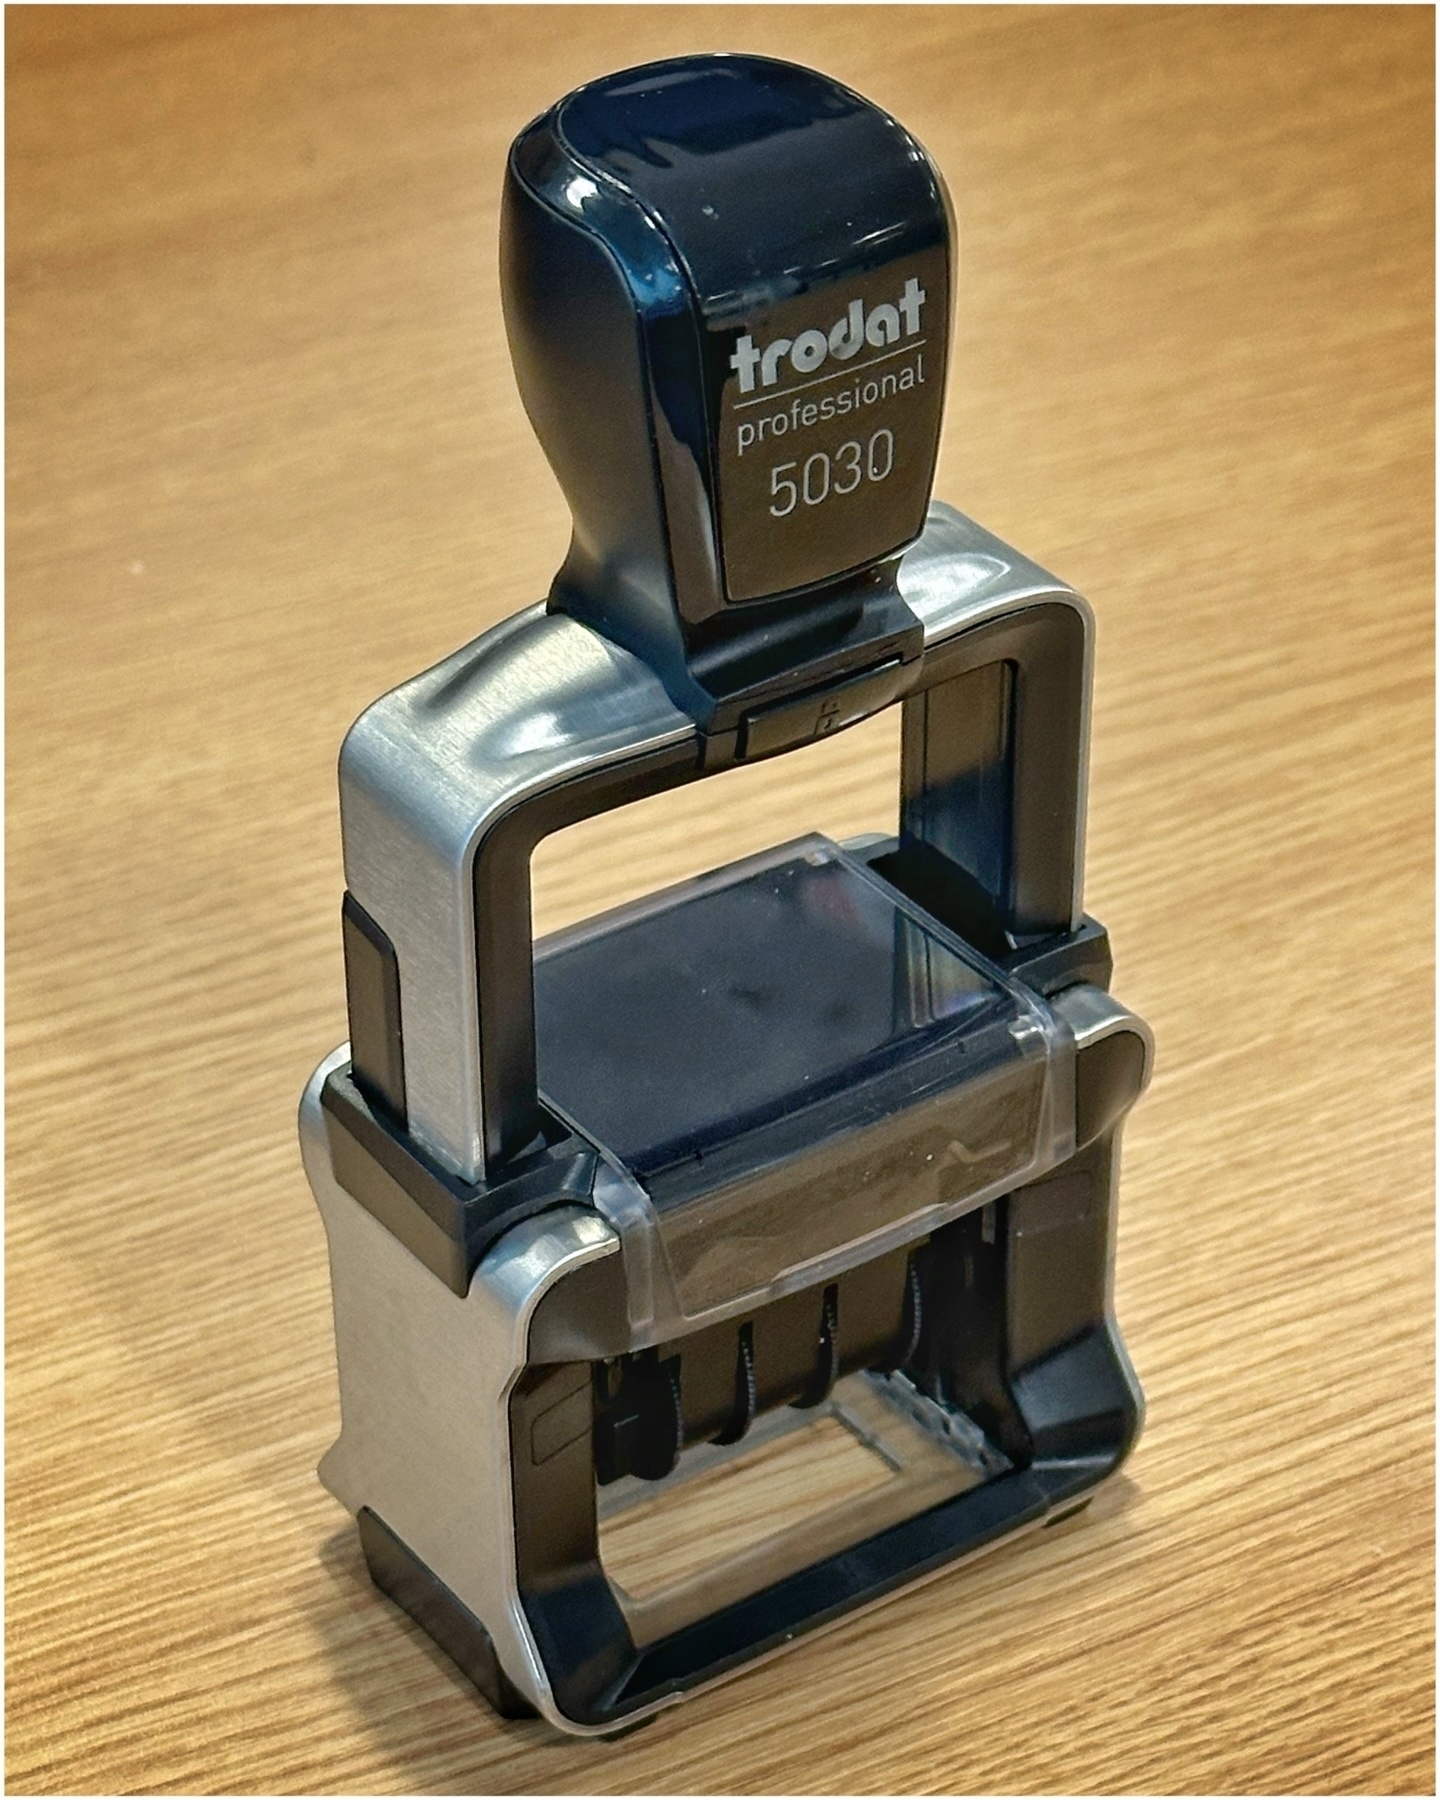 A Trodat Professional 5030 self-inking stamp placed on a wooden surface.